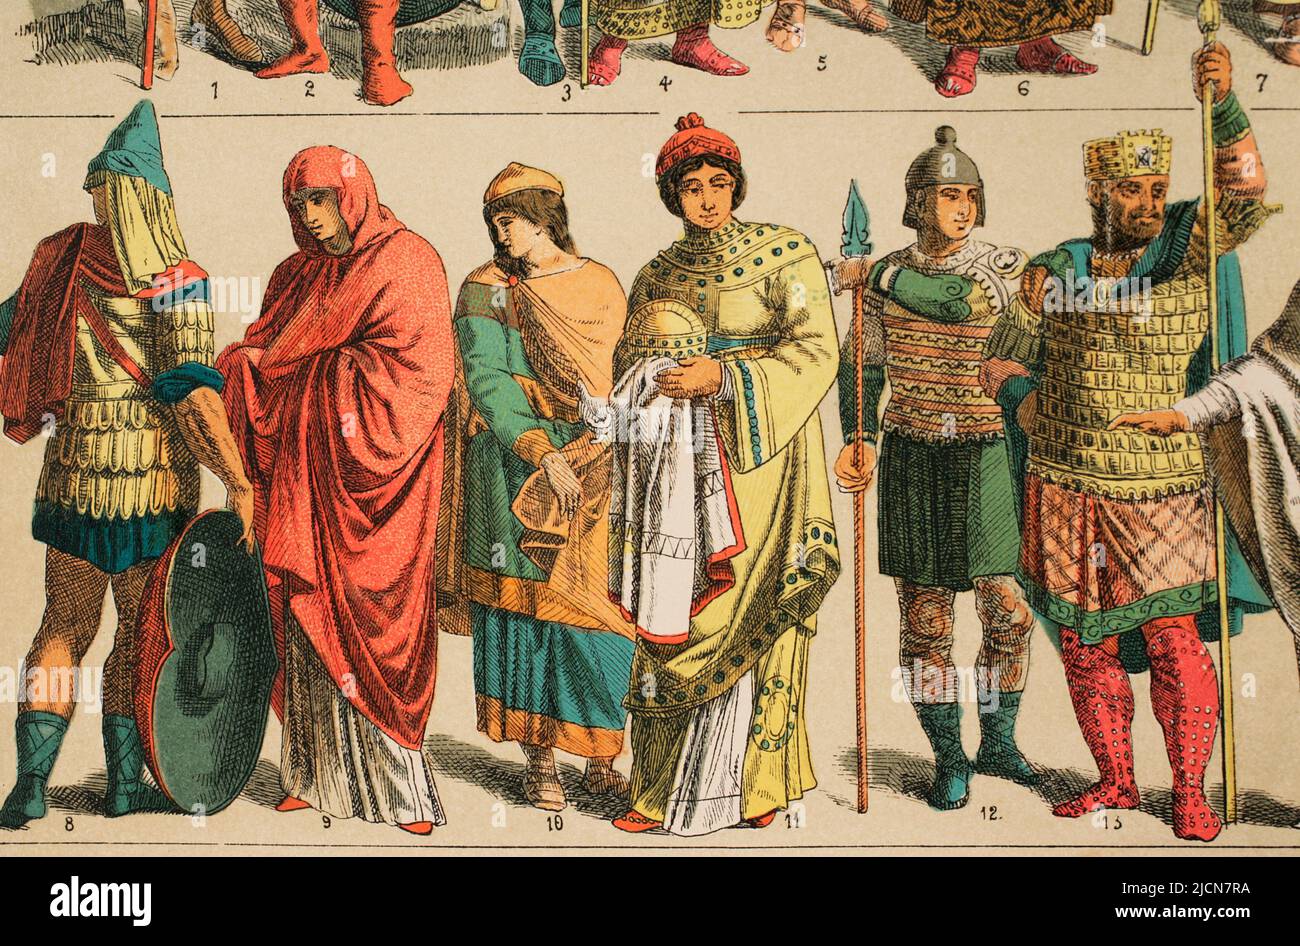 Byzantines (700-1000). From left to right, 8: Royal soldier, 9: Womanly suit, 10: Work Suit. Cap, 11: Womanly main person outfit, 12: Most modern warrior outfit and 13: Main warrior or king outfit. Chromolithography. 'Historia Universal,' by Cesar Cantú. Volume IV. Published in Barcelona, 1881. Stock Photo